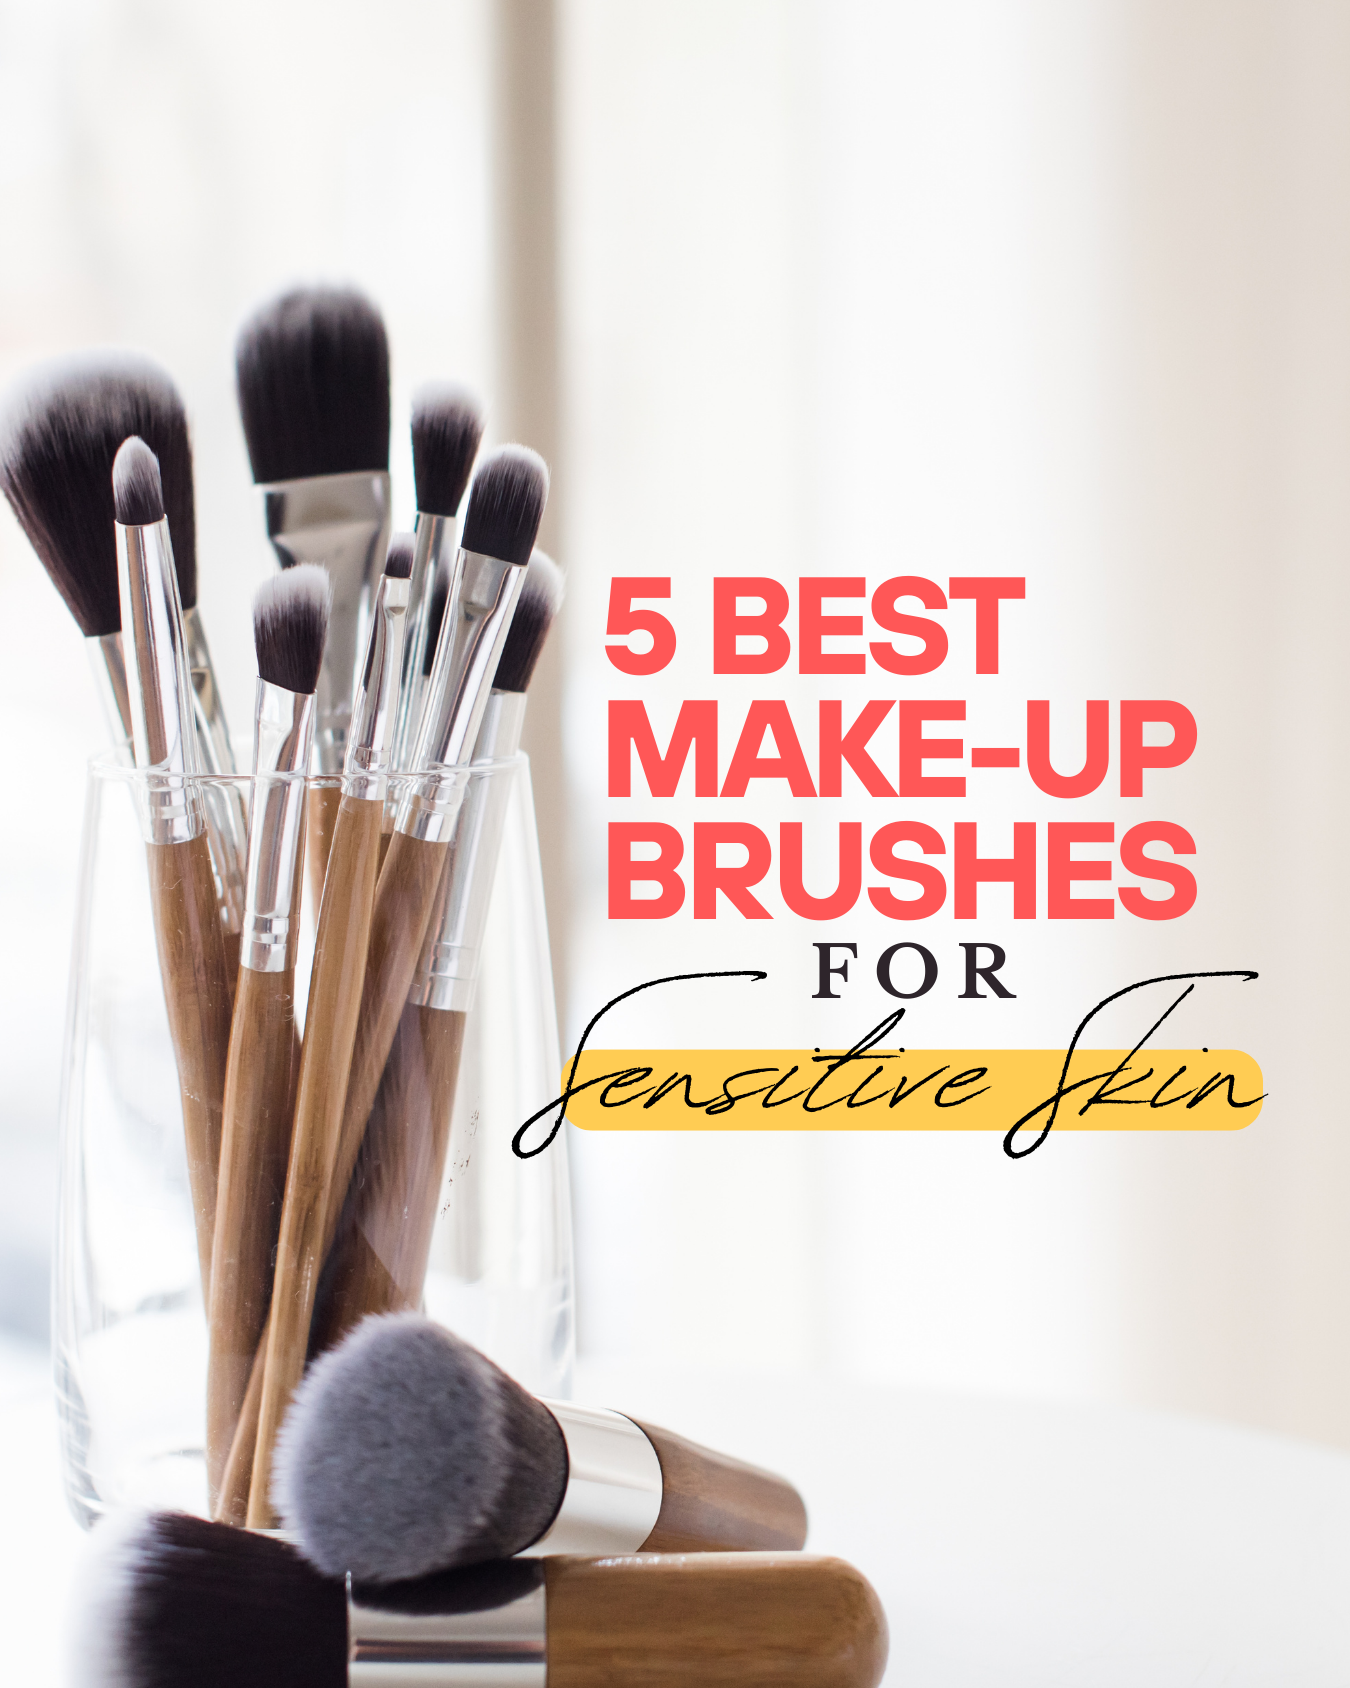 Spreading the love: The 5 Best Make Up Brushes for Sensitive Skin | Best Life Reviews